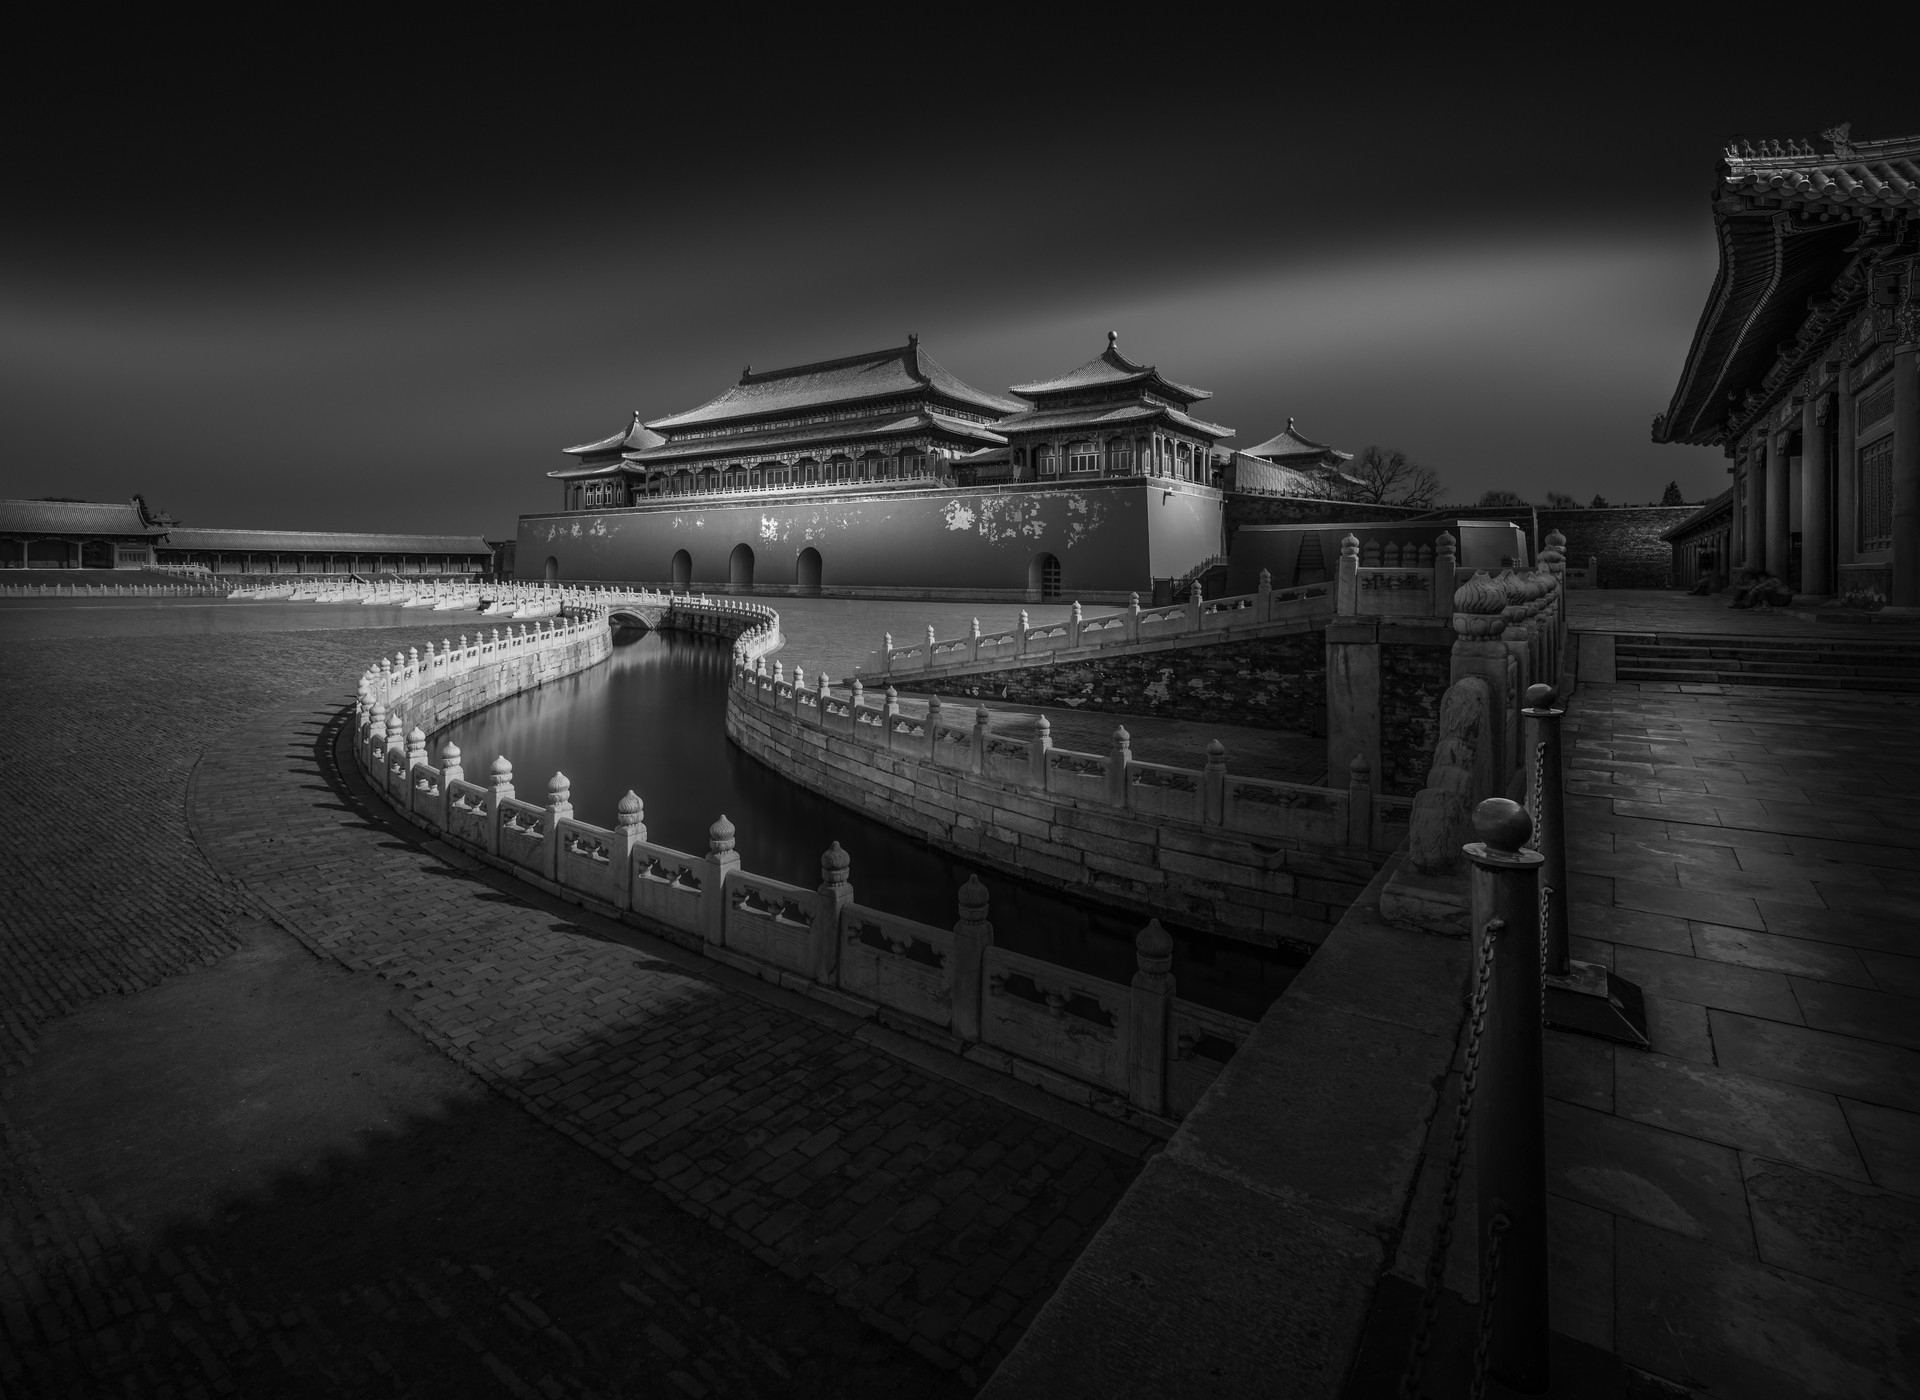 Black and White Photo Awards 2022 Architecture bronze mention - Zhenwei Wang - The Last Emperor